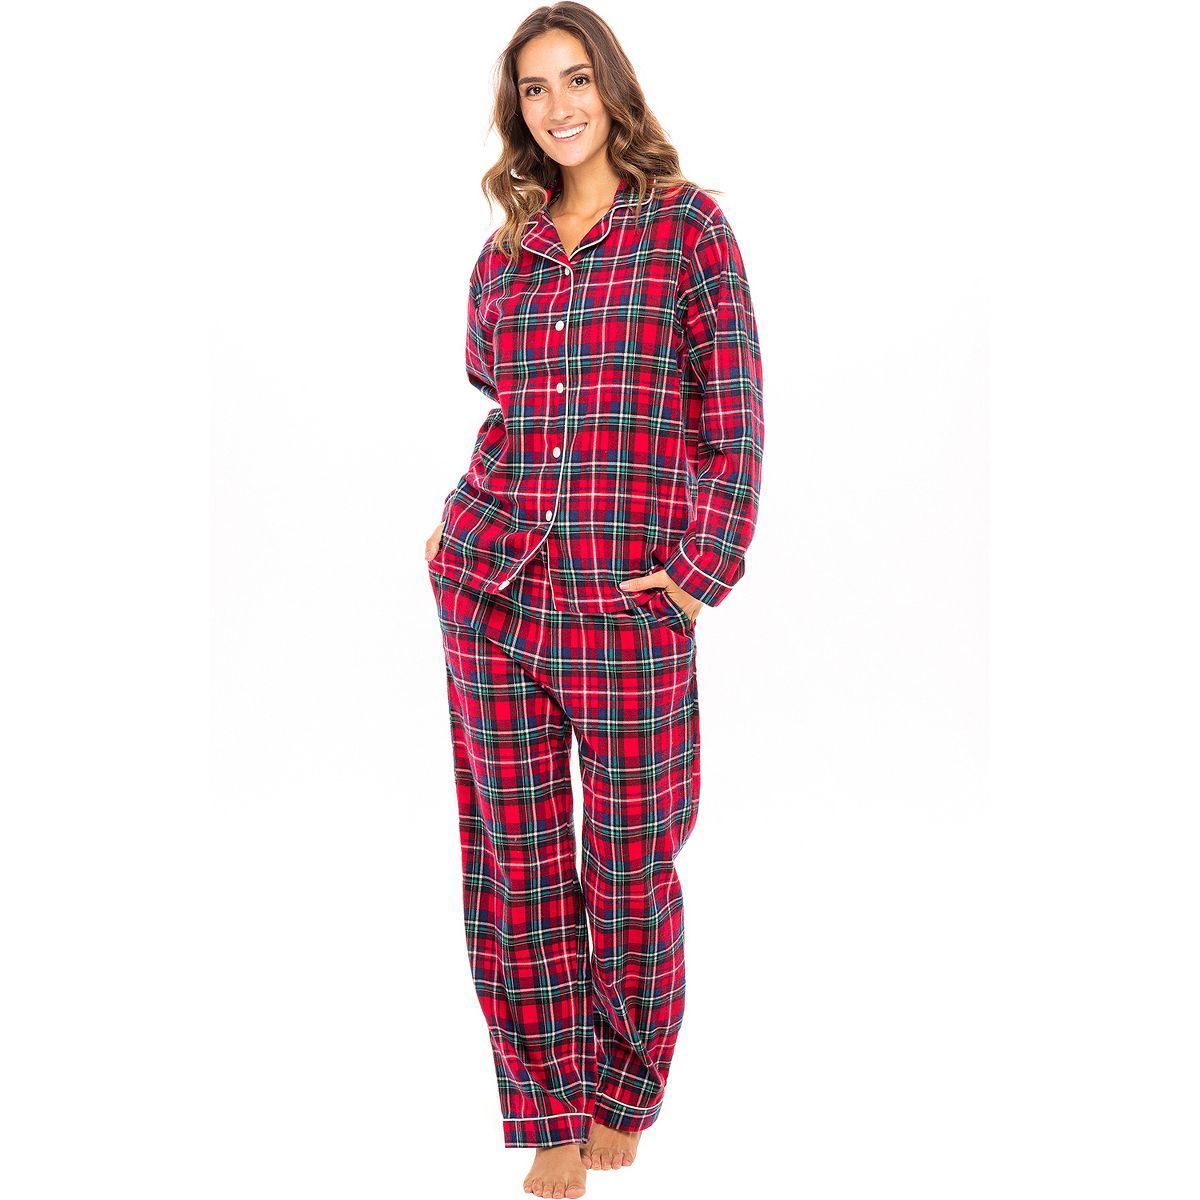 Women's Warm Cotton Flannel Pajamas Set, Soft Long Sleeve Shirt and Pajama Pants with Pockets | Target